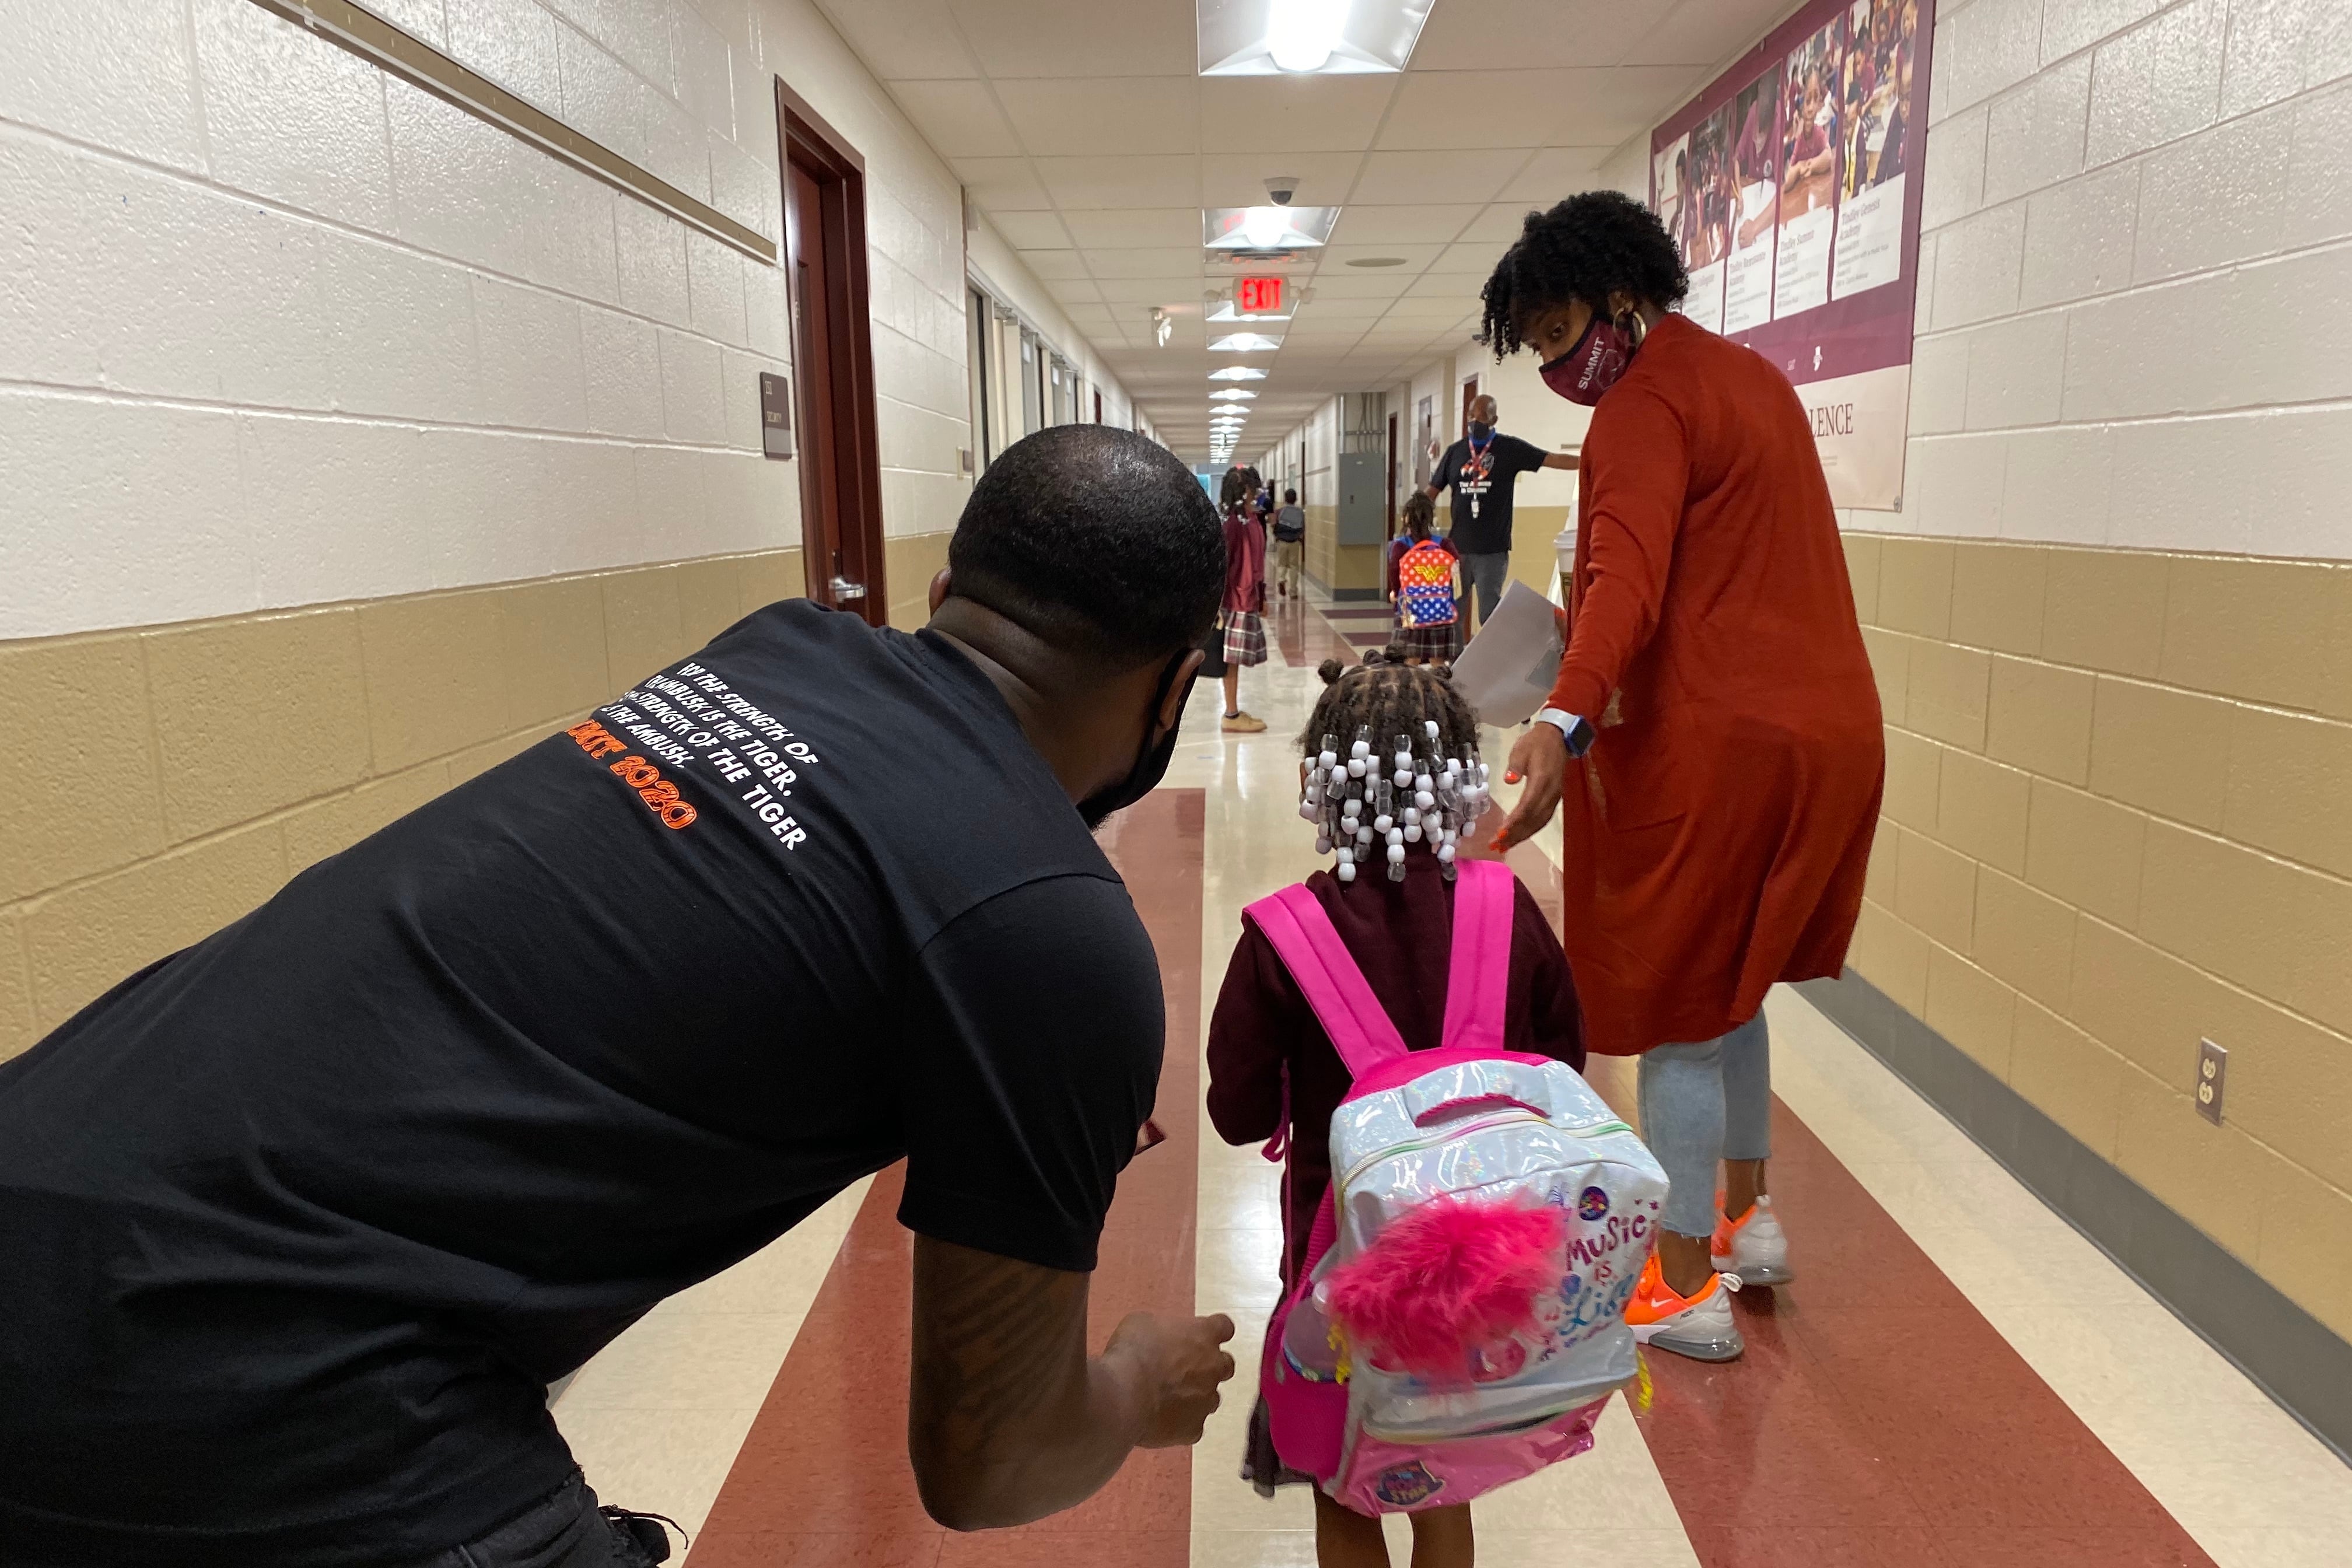 A masked woman in a long orange sweater guides a child carrying a pink backpack down a school hall, while a man in a black T-shirt bends down slightly behind the child.